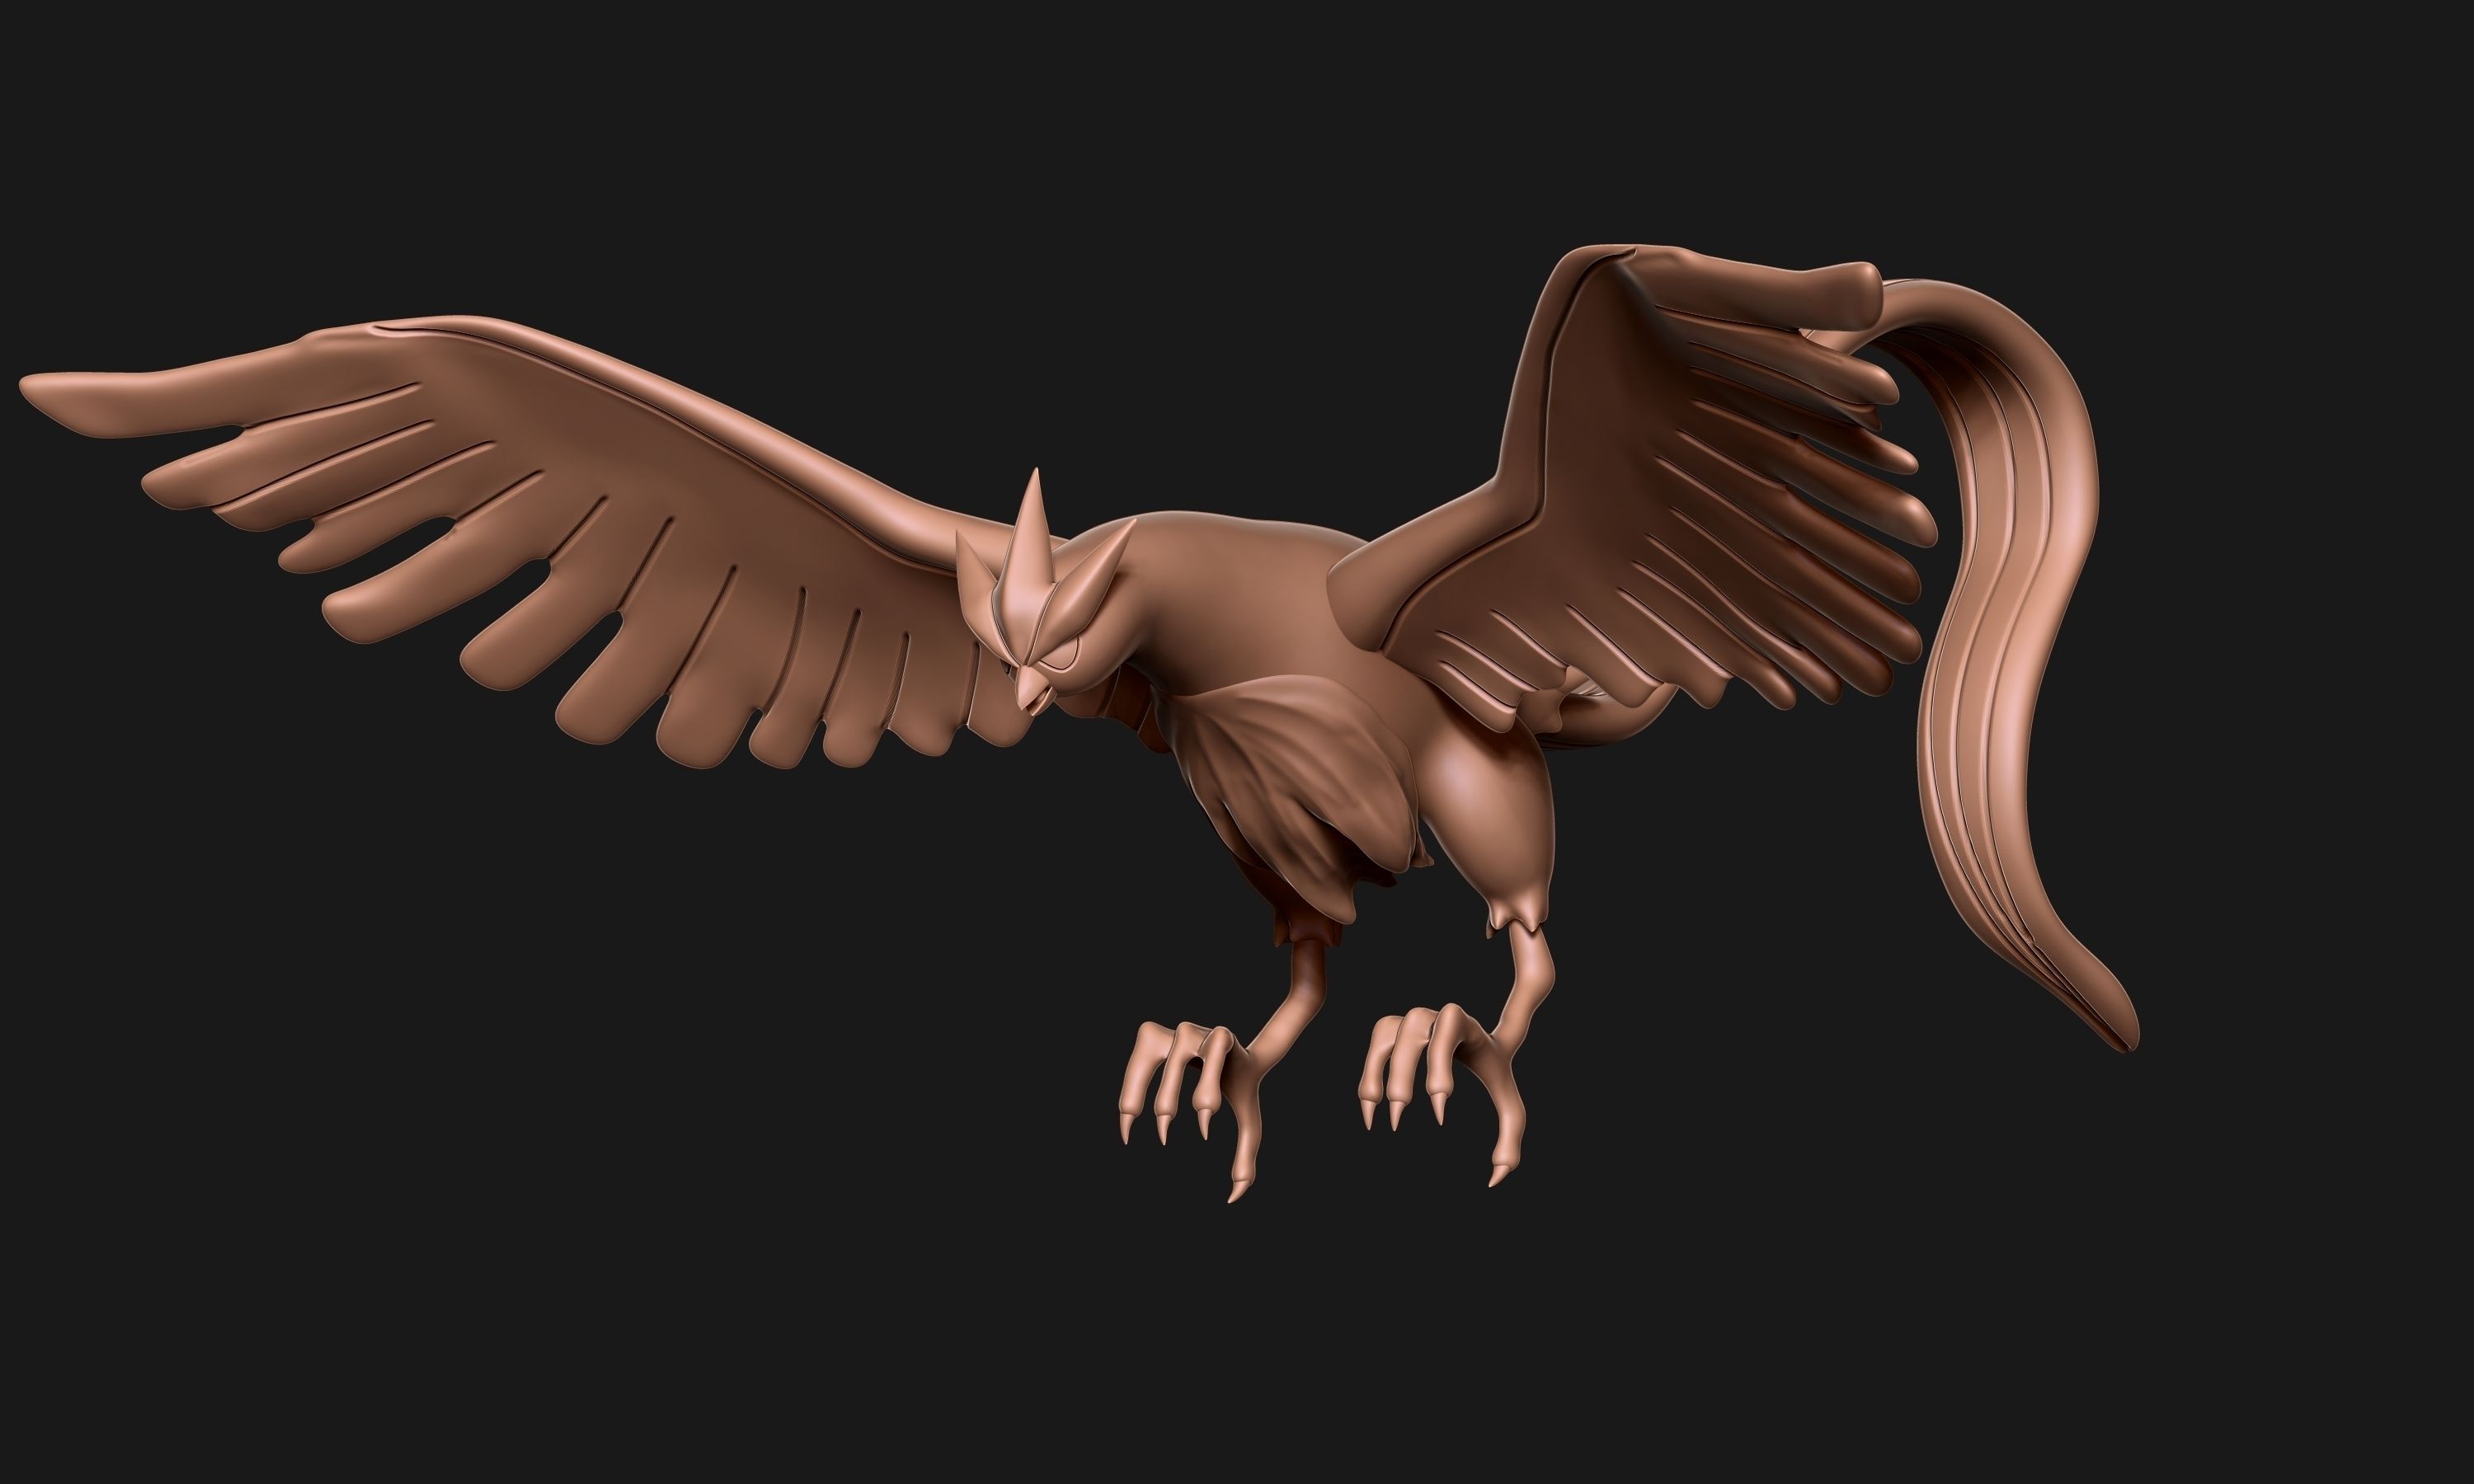 articuno-pronto-1.jpg Download OBJ file Pokemon - Articuno(with cuts and as a whole) • Template to 3D print, ErickFontoura3D